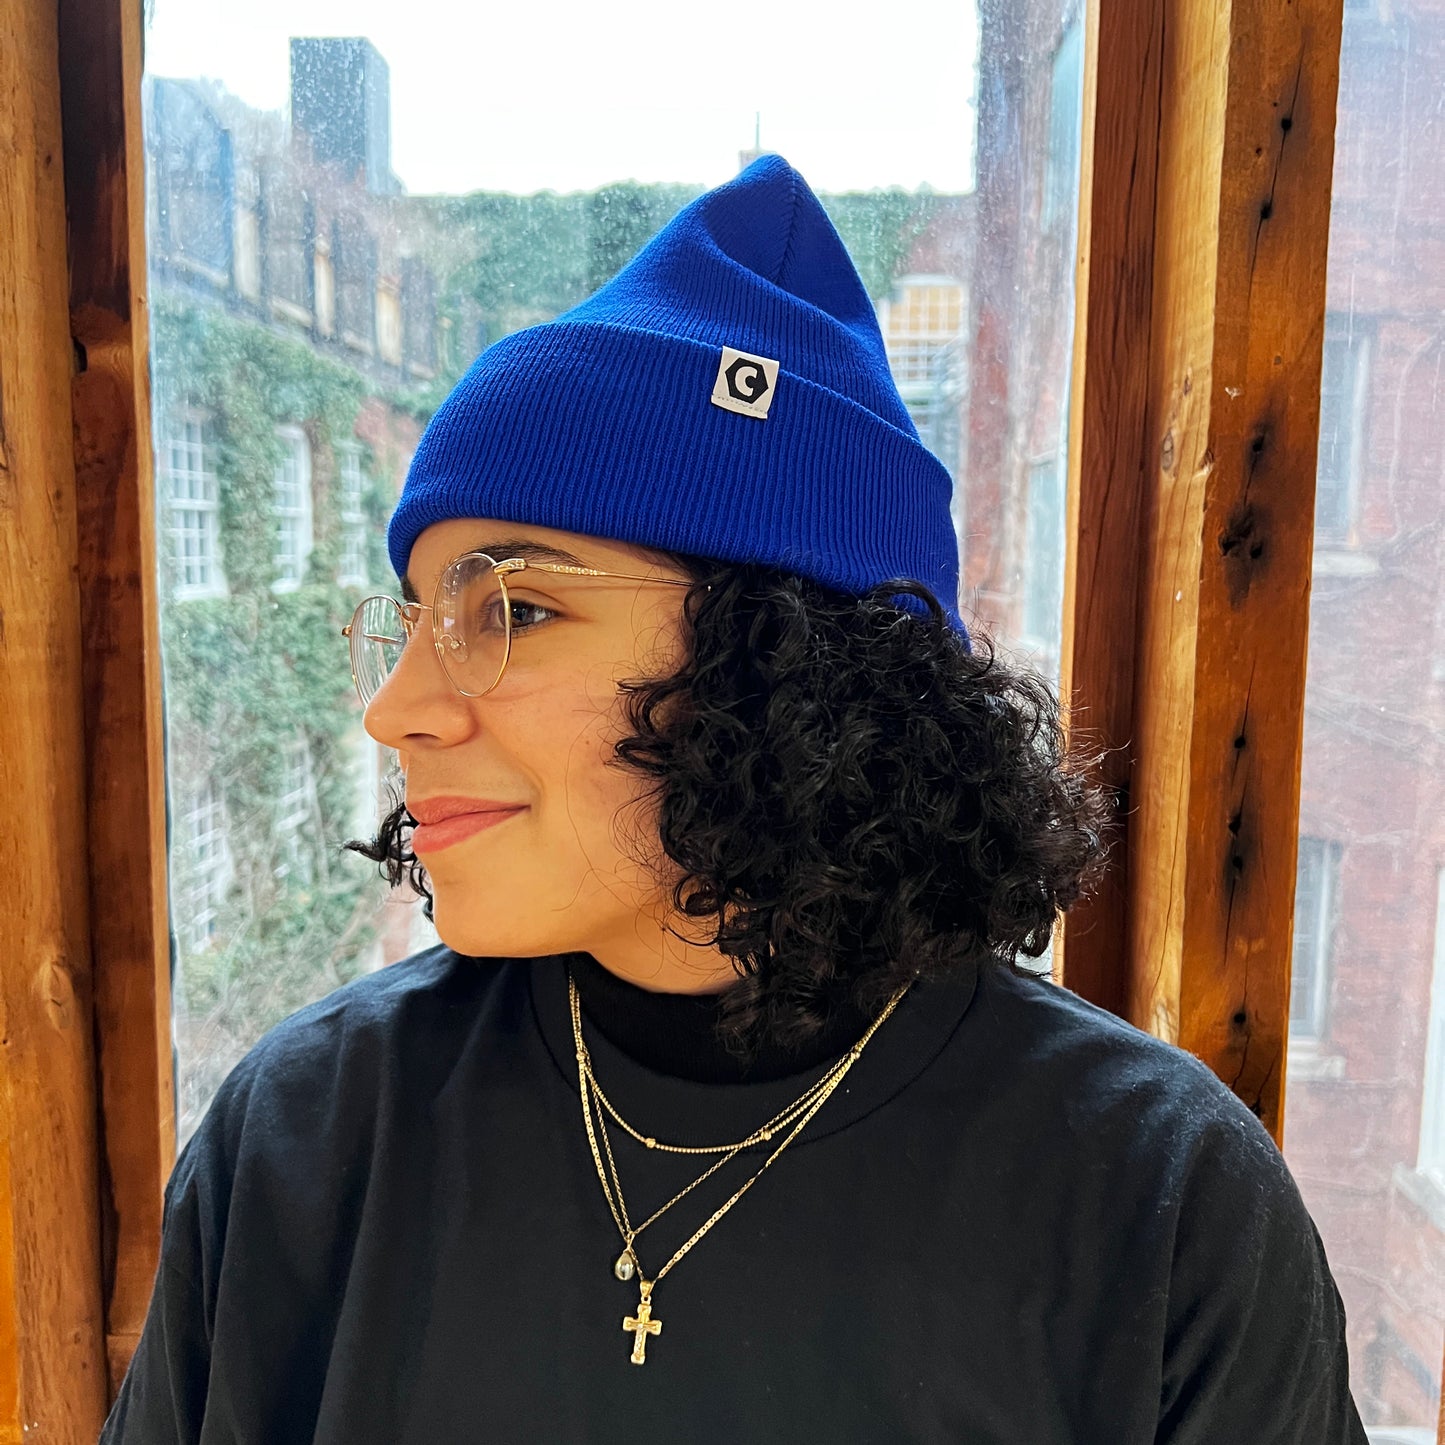 Noor wears the Canadaland toque in our signature blue, with a cheeky little smirk on her face.